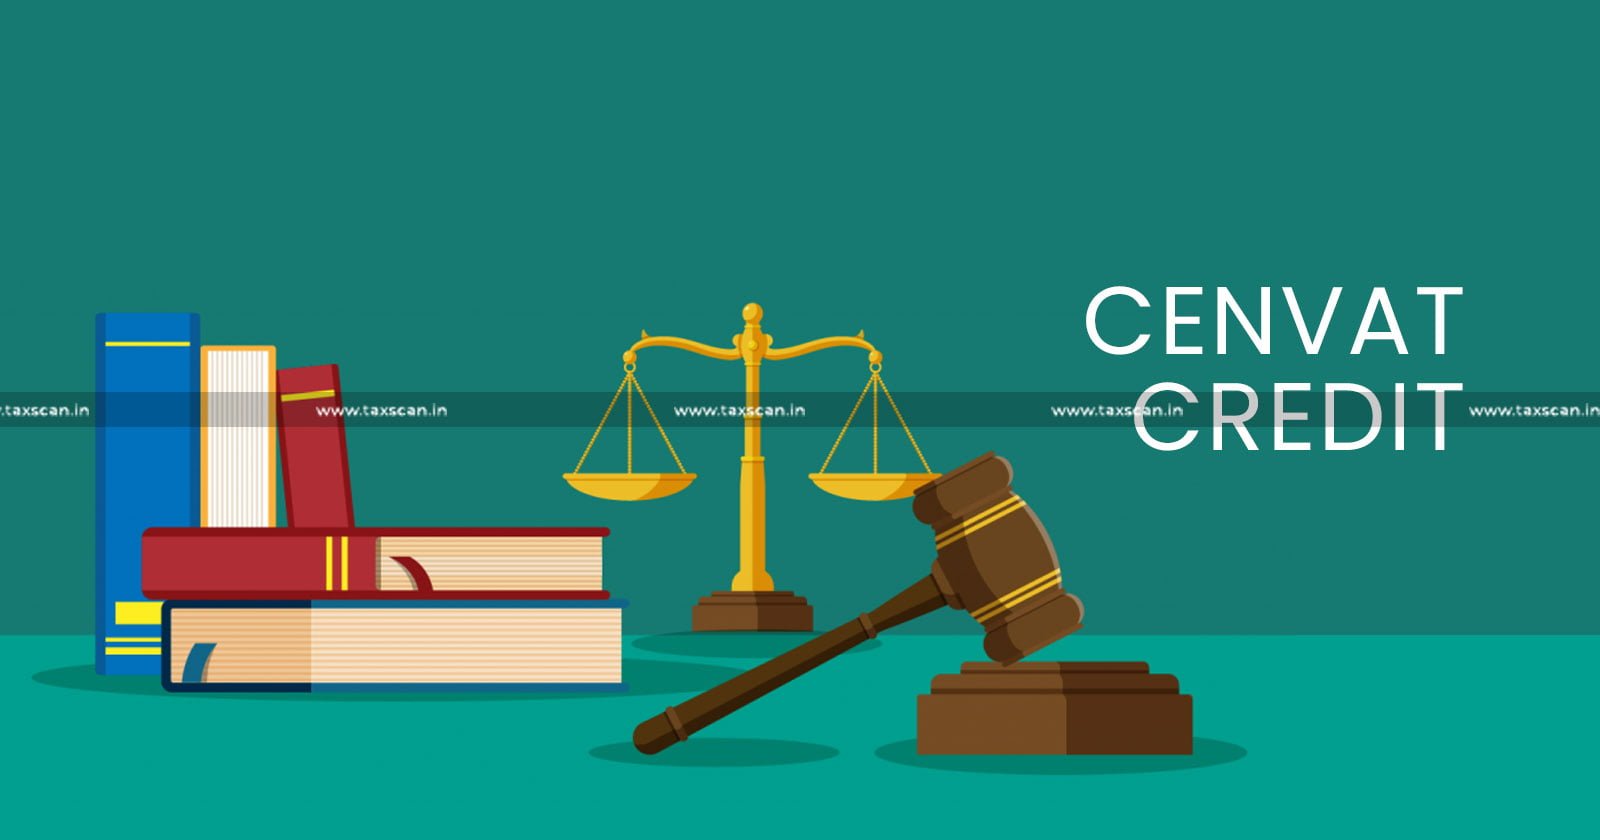 Refund Claim of Cenvat Credit - Benefit of Refund Claim -Refund Claim - Cenvat Credit - CESTAT - taxscan